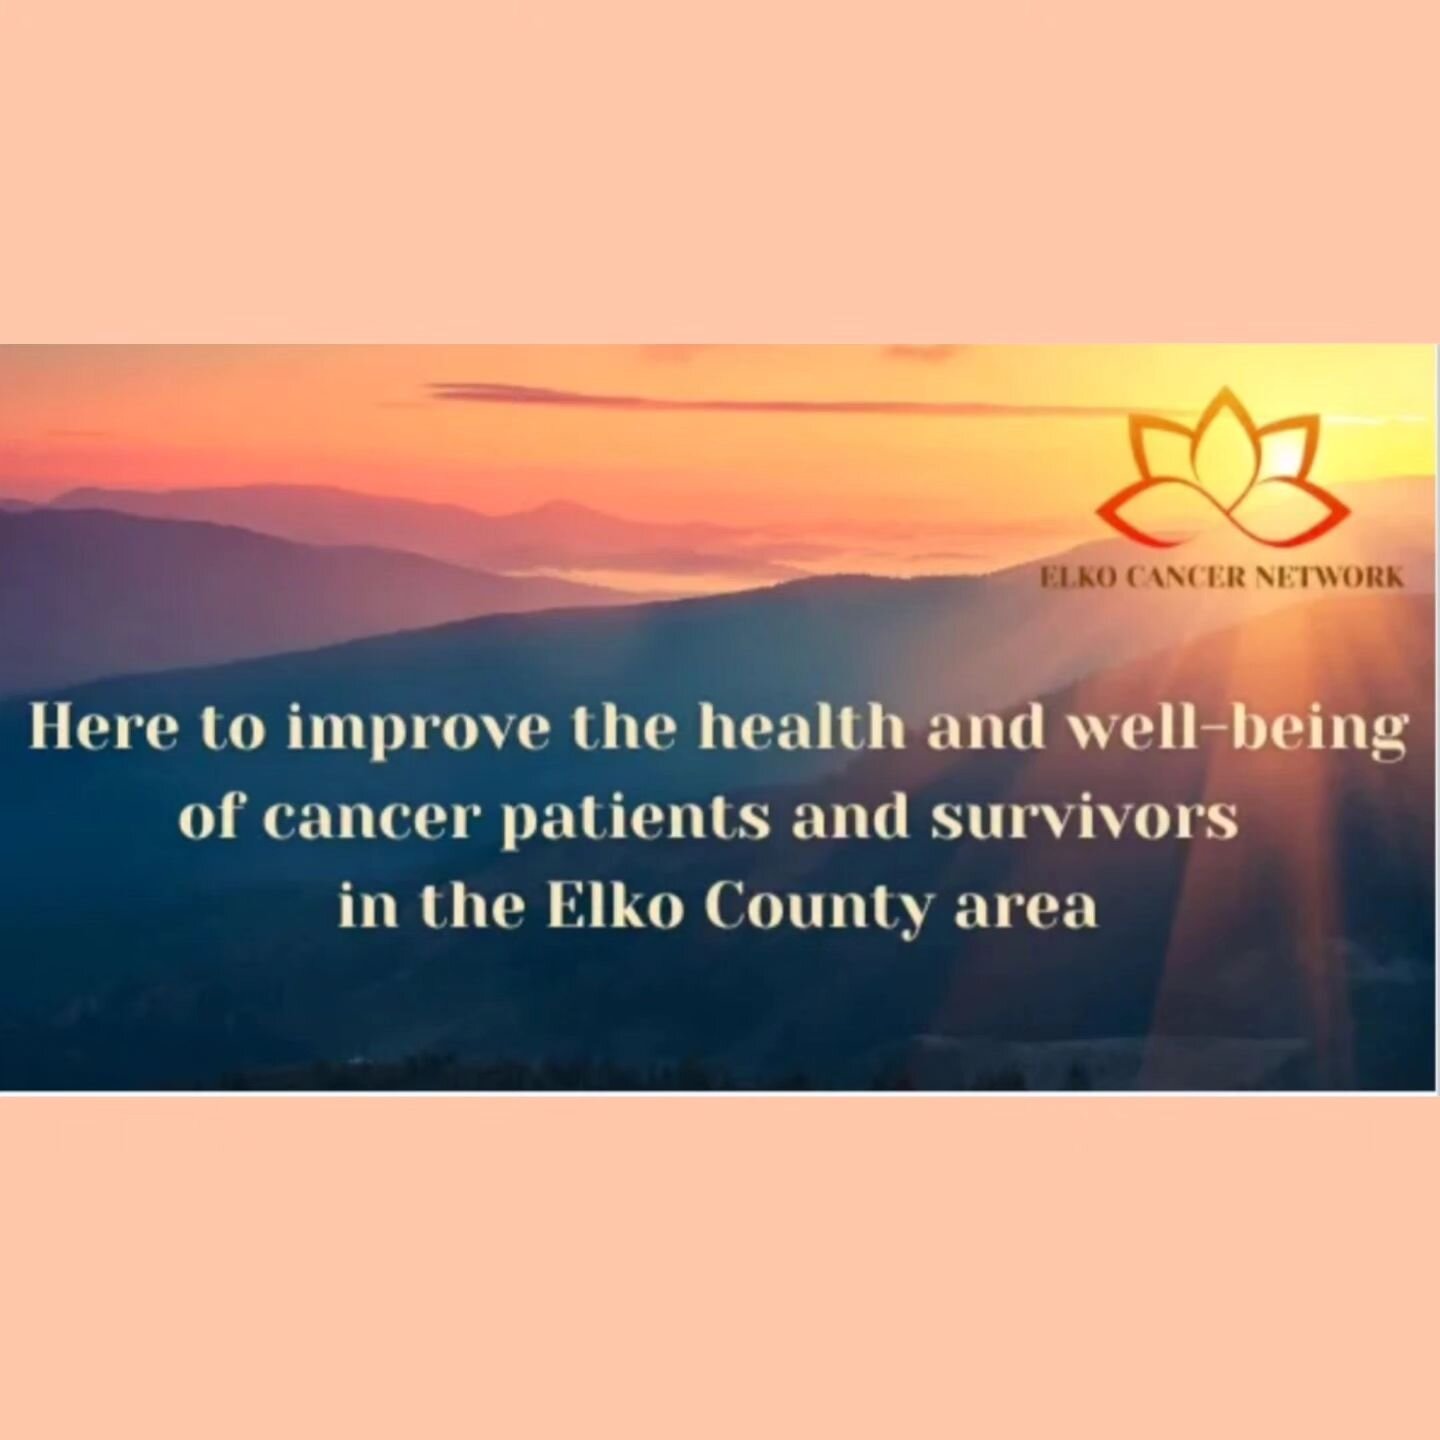 Elkocancernetwork.org

We are here to help the residents of Elko County,  check out our page.